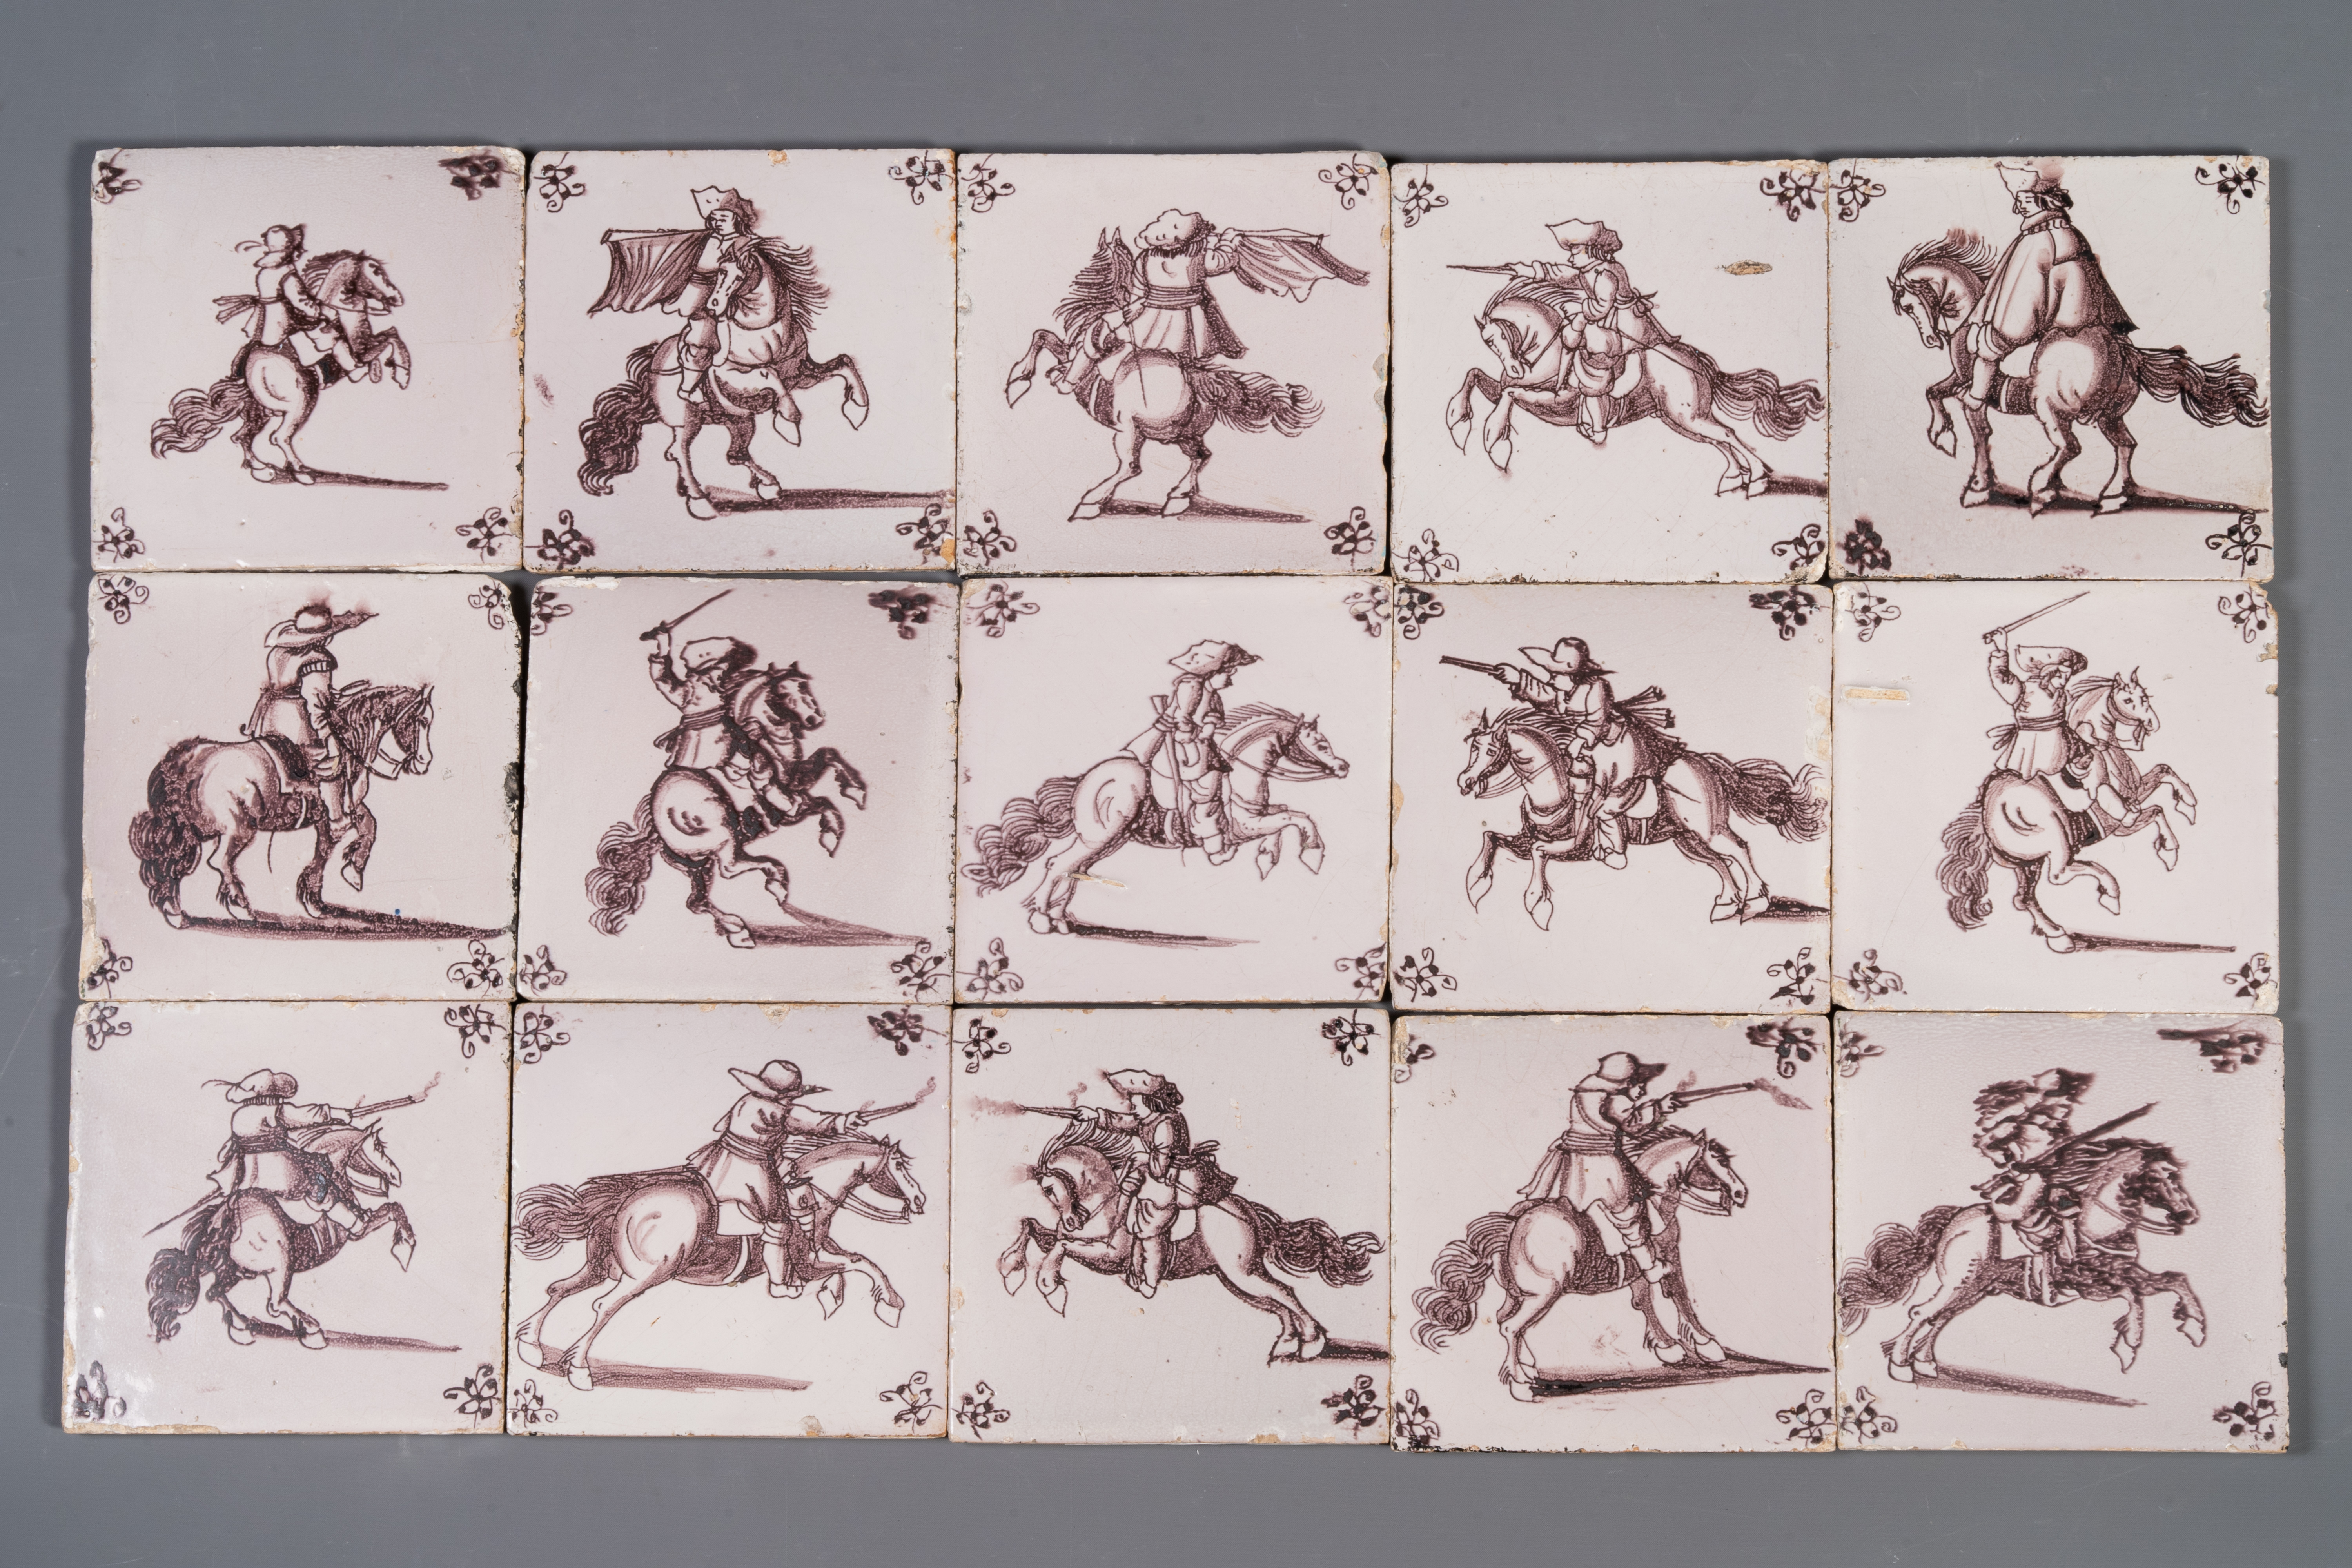 Fifteen Dutch Delft manganese tiles with horse riders, late 17th C.